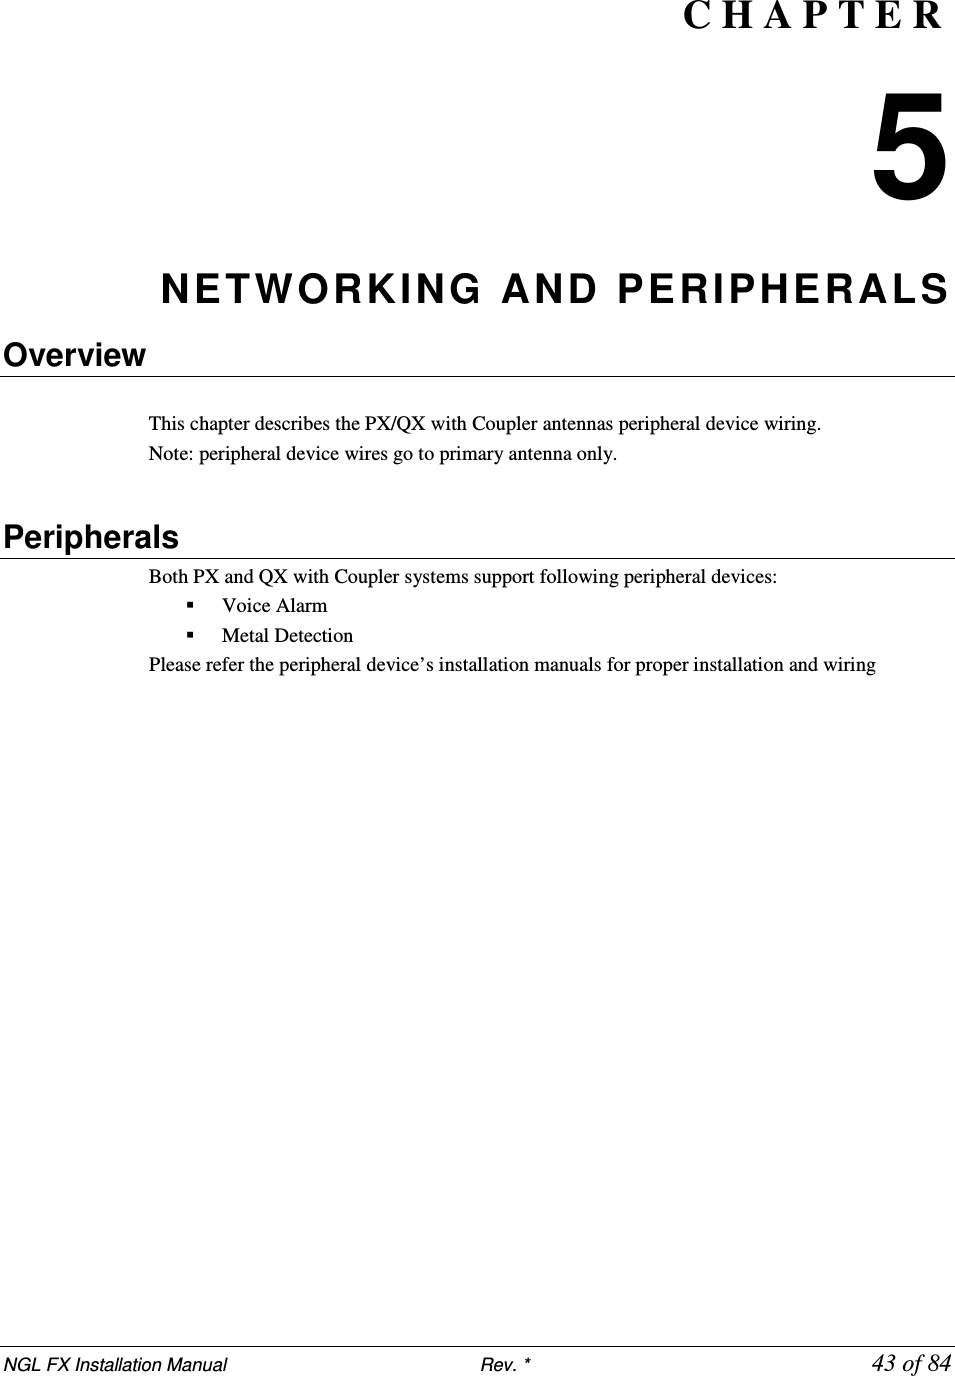 NGL FX Installation Manual                           Rev. *            43 of 84 C H A P T E R  5 NETWORKING  AND PERIPHERALS   Overview  This chapter describes the PX/QX with Coupler antennas peripheral device wiring.  Note: peripheral device wires go to primary antenna only.   Peripherals Both PX and QX with Coupler systems support following peripheral devices:  Voice Alarm  Metal Detection Please refer the peripheral device’s installation manuals for proper installation and wiring  